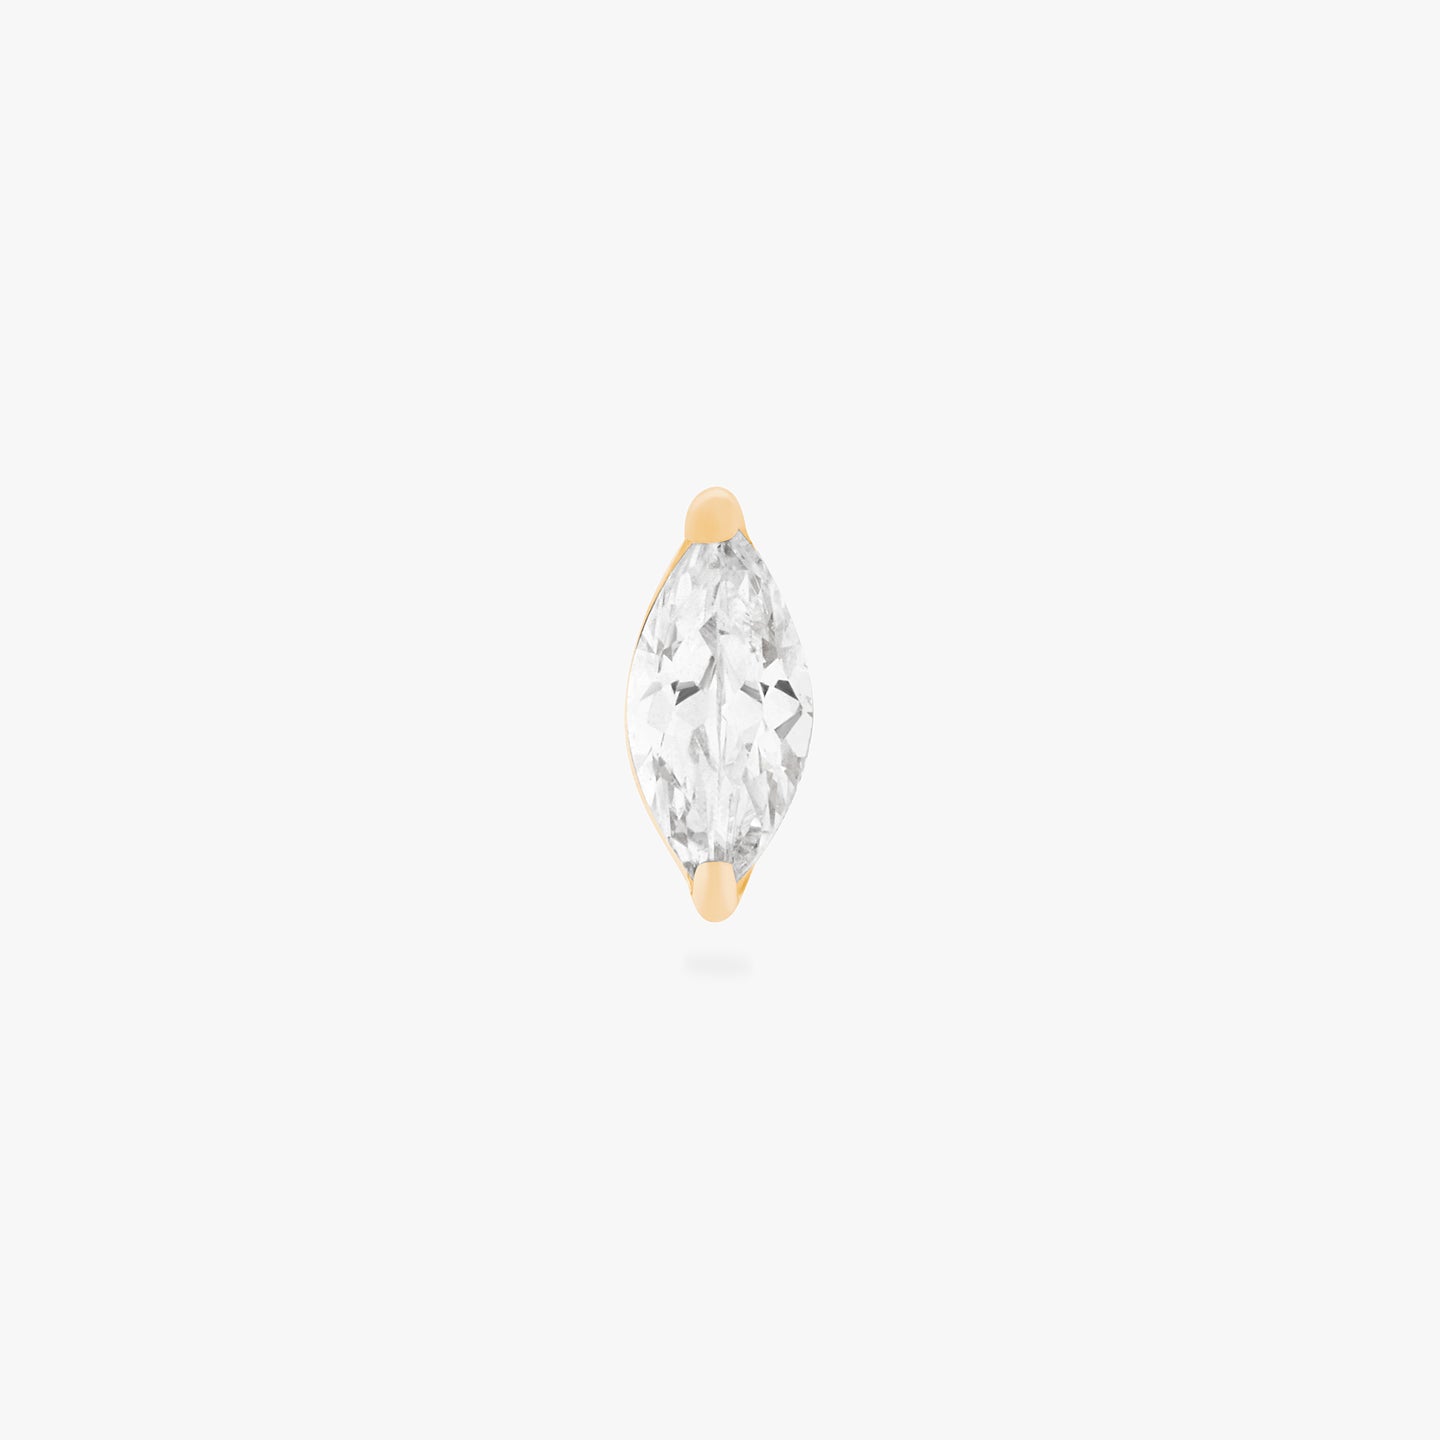 This is an image of a 6mm length gold/clear flatback post with a marquise shaped CZ disc. color:null|6mm